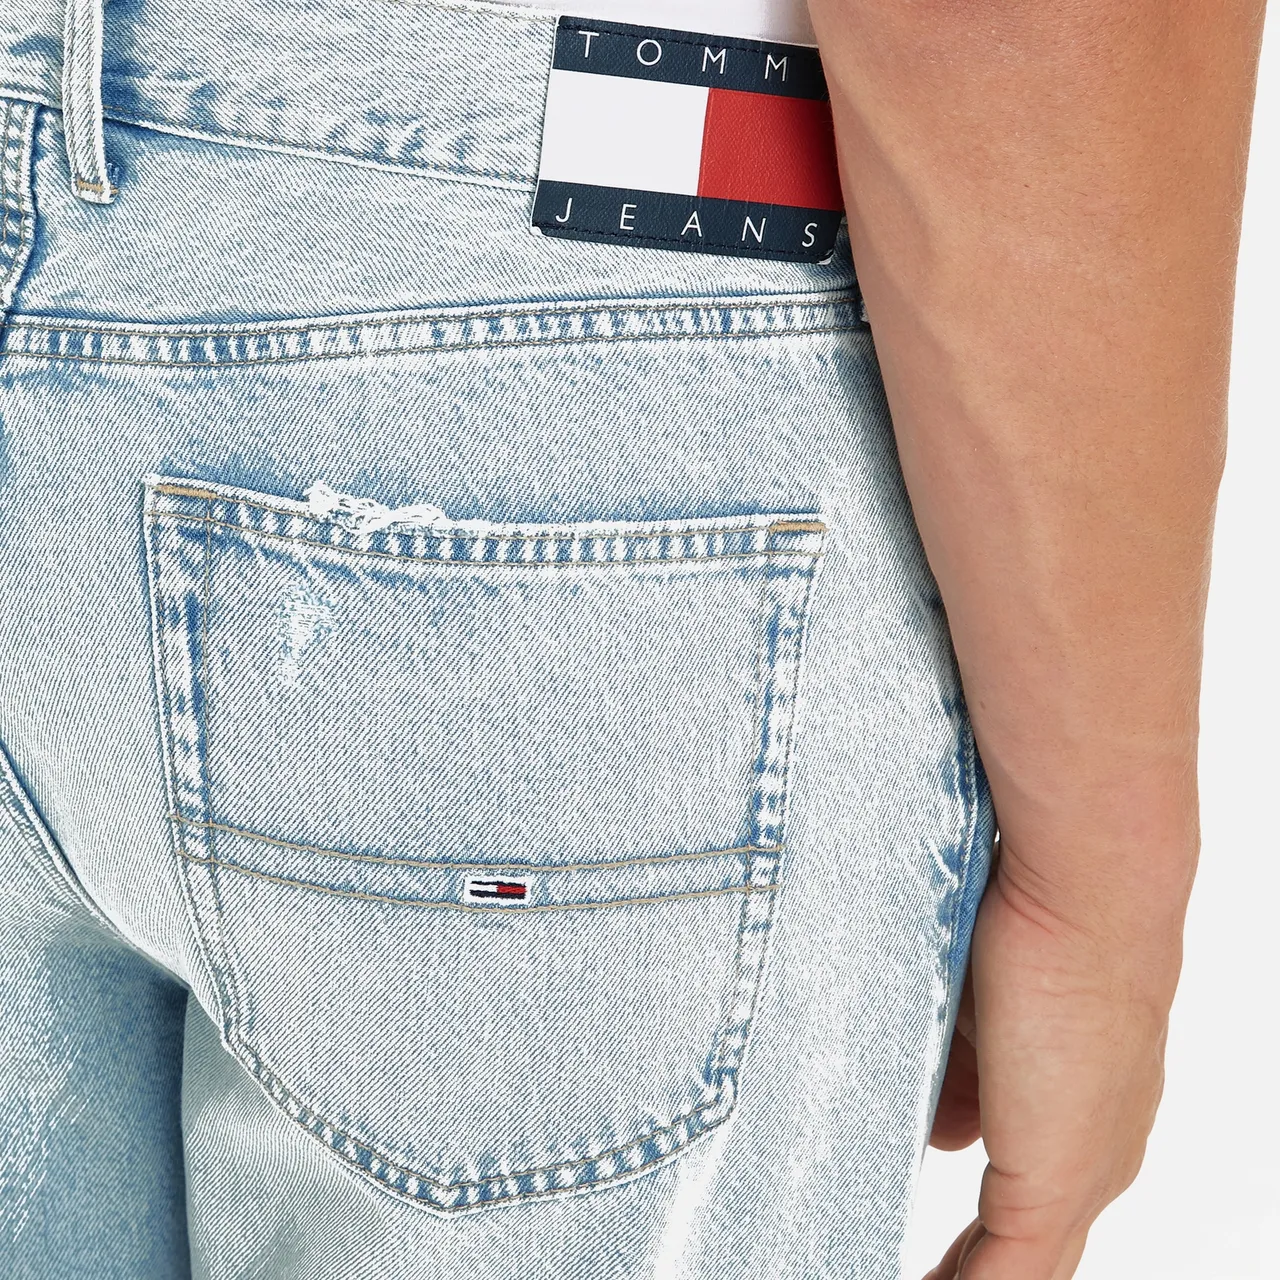 Tommy Jeans Isaac Archive Denim Jeans